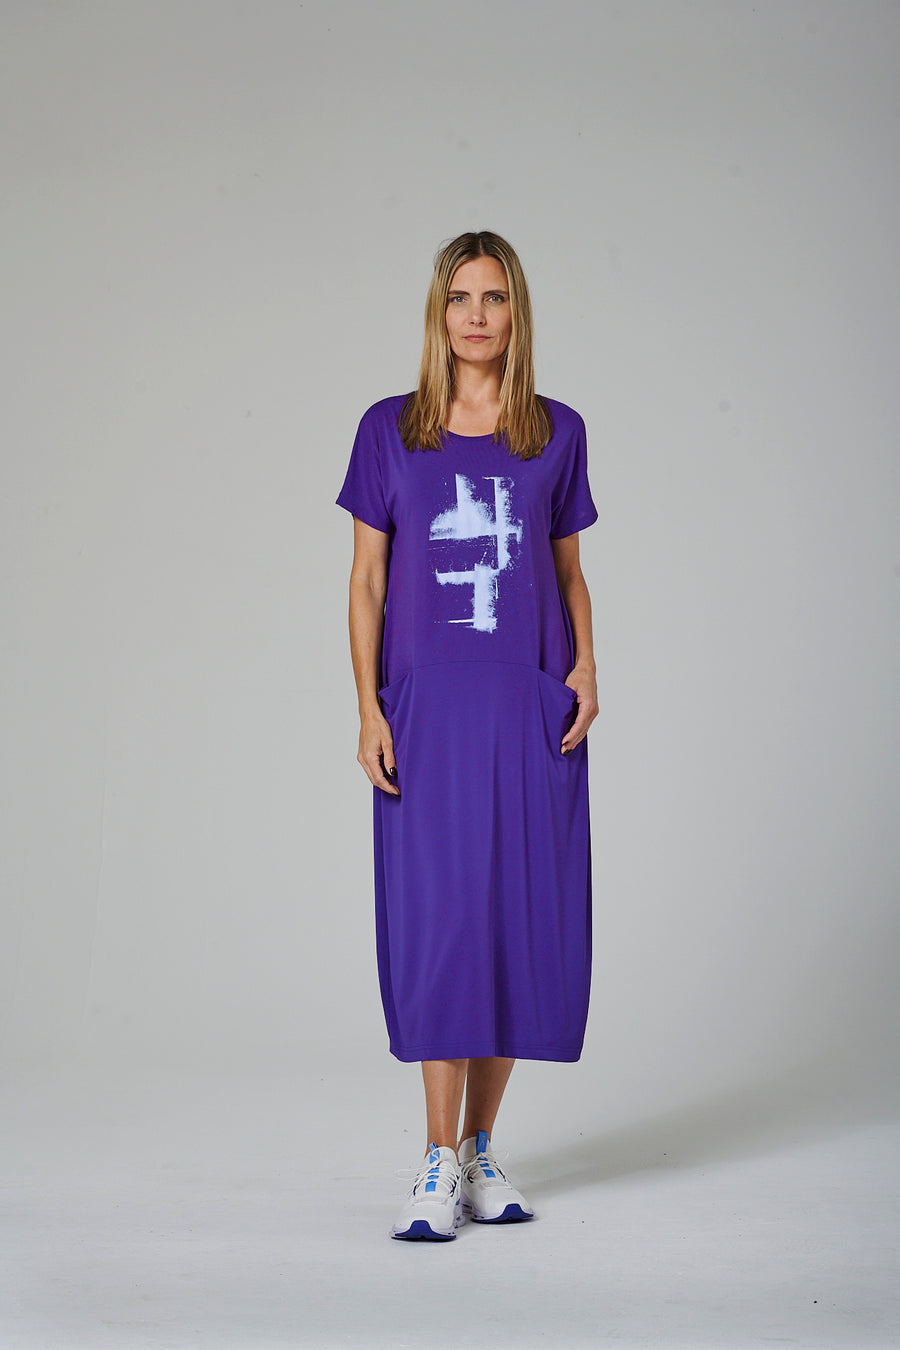 Dress made of acetate jersey blended fabric with elastane (328k1) printed or plain